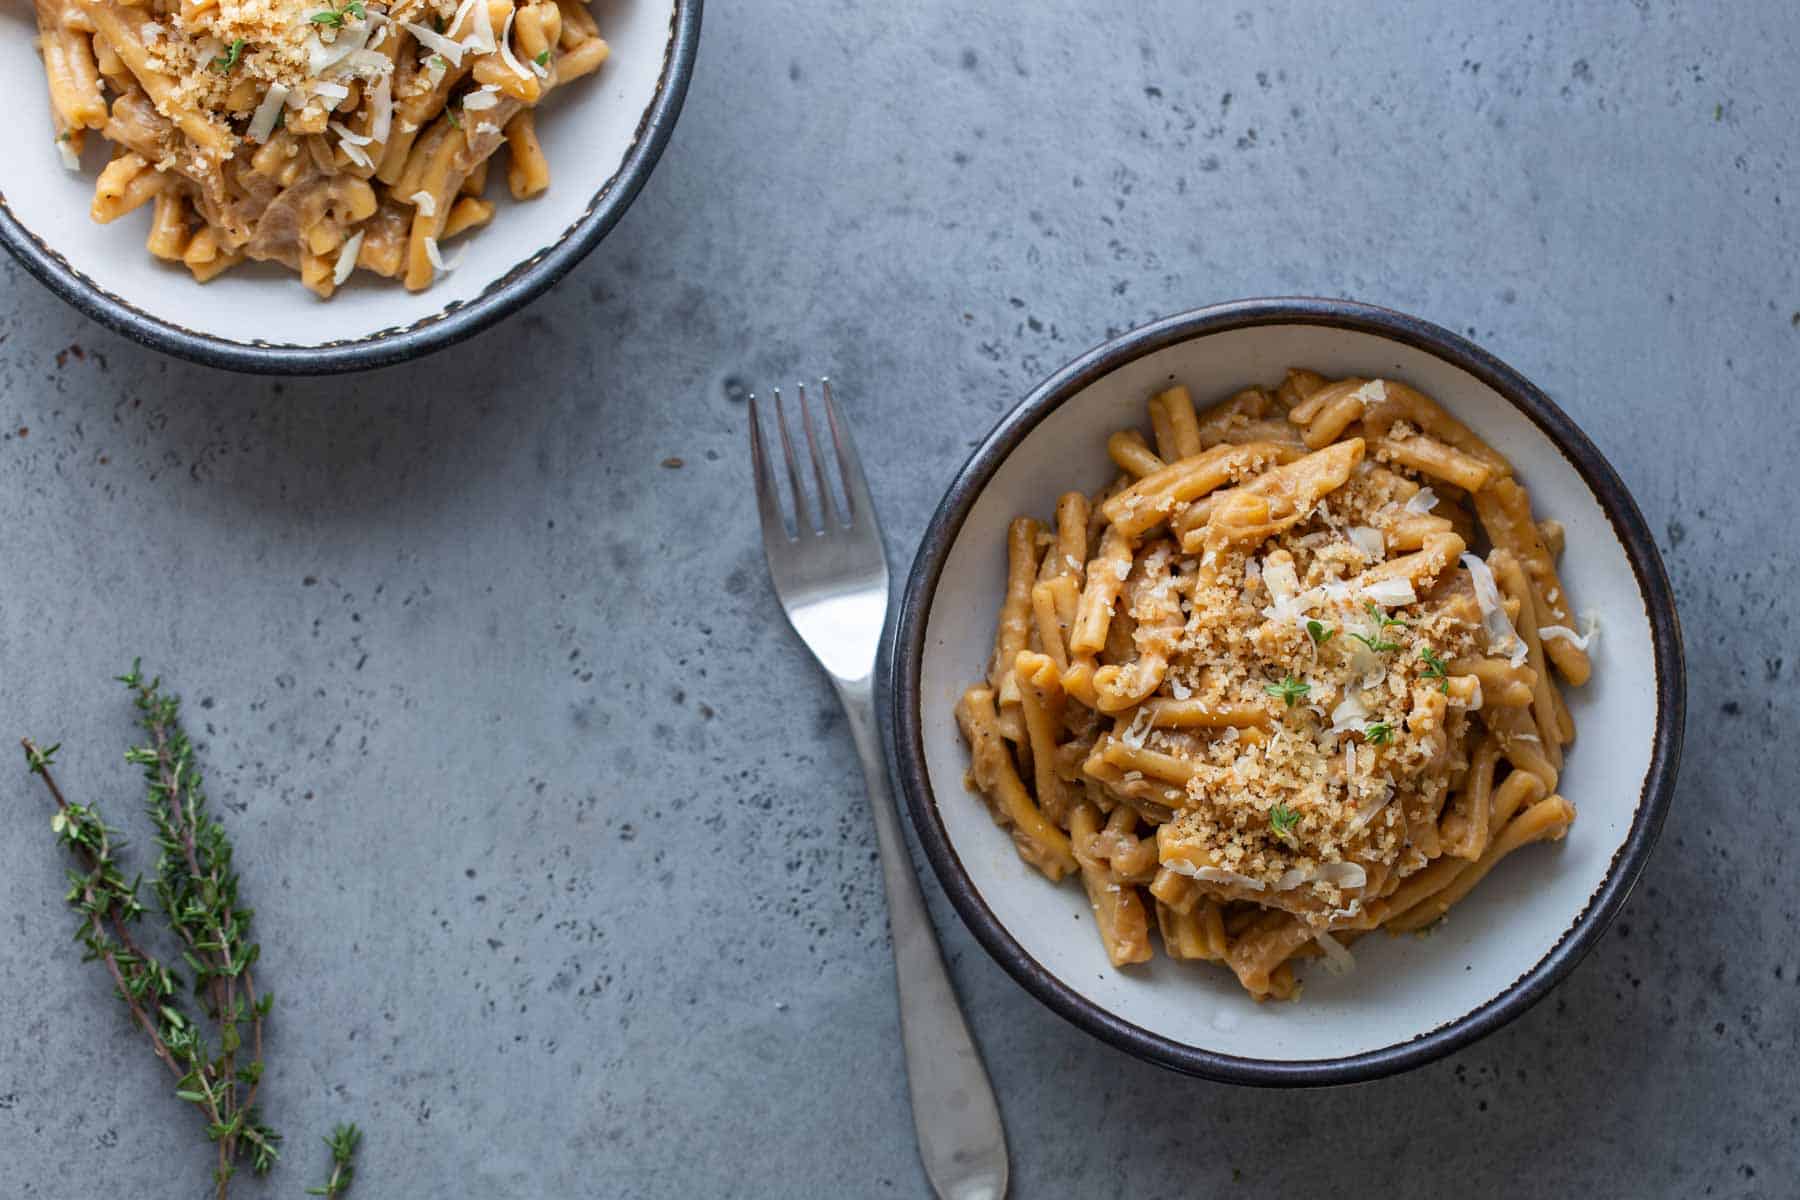 Two bowls of pasta topped with grated cheese and herbs on a textured gray surface, accompanied by a fork and sprigs of thyme.